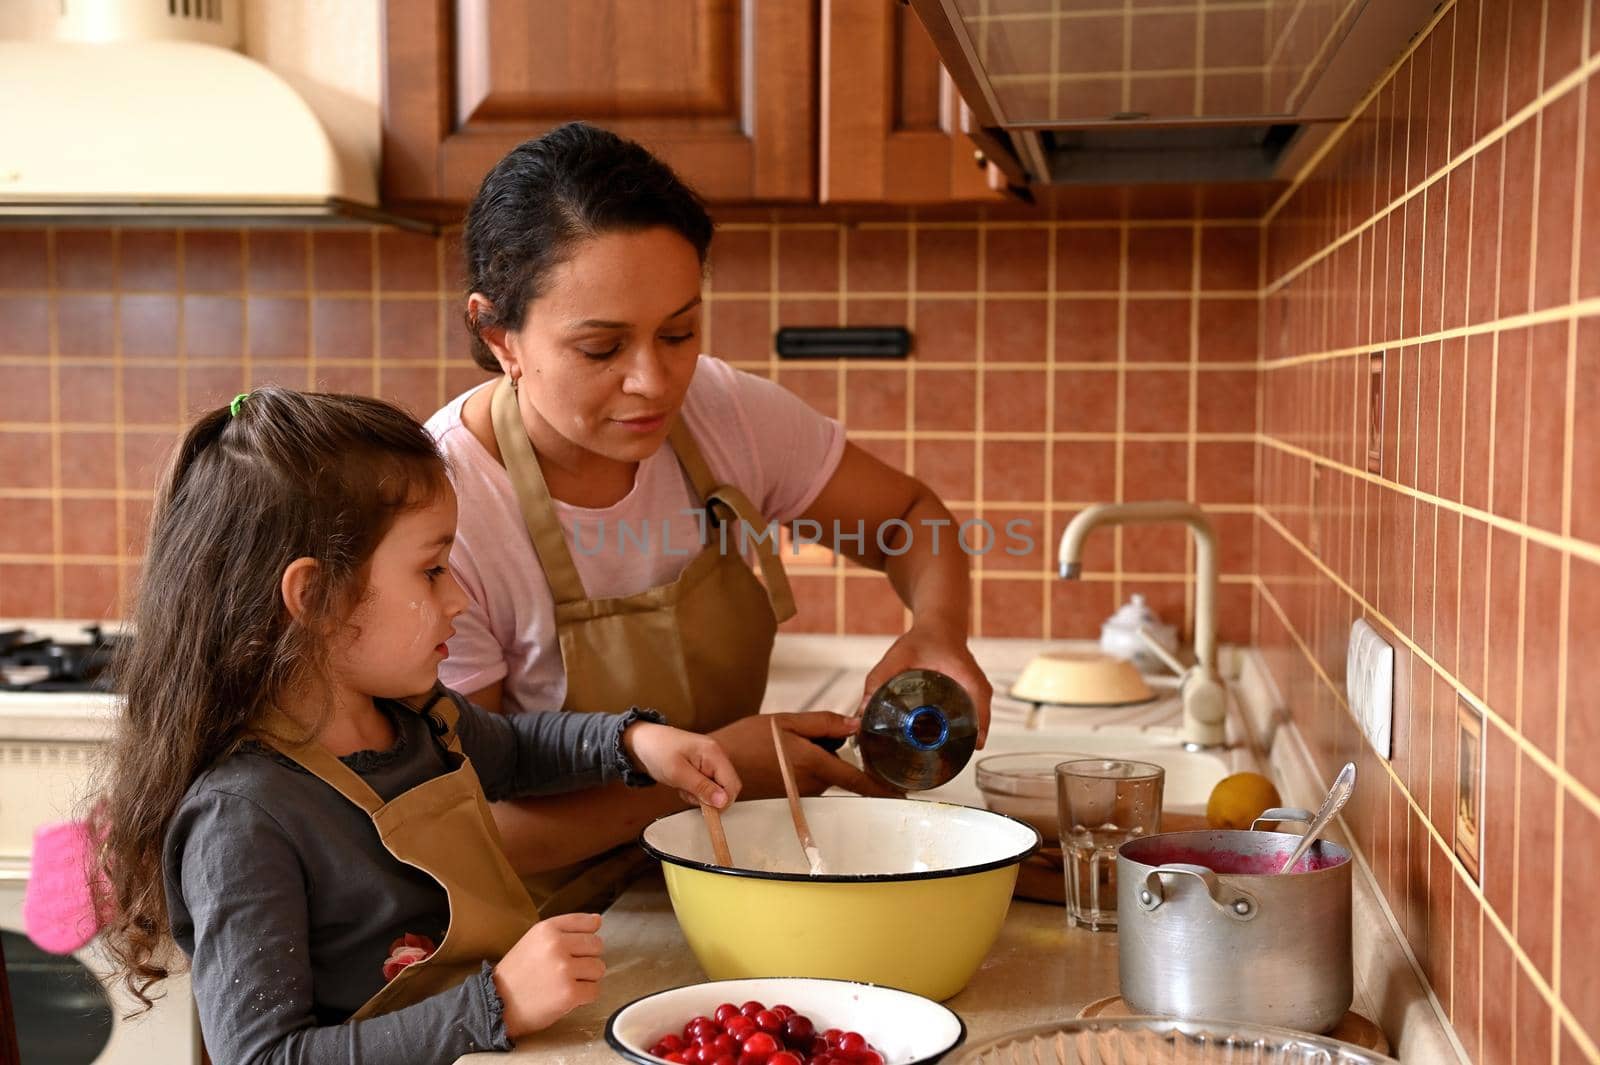 Mom and daughter cooking together, preparing dough for homemade festive cherry pie. Charming woman pouring some oil into a vintage enamel bowl, adding ingredients. Baking concept. Family relationships